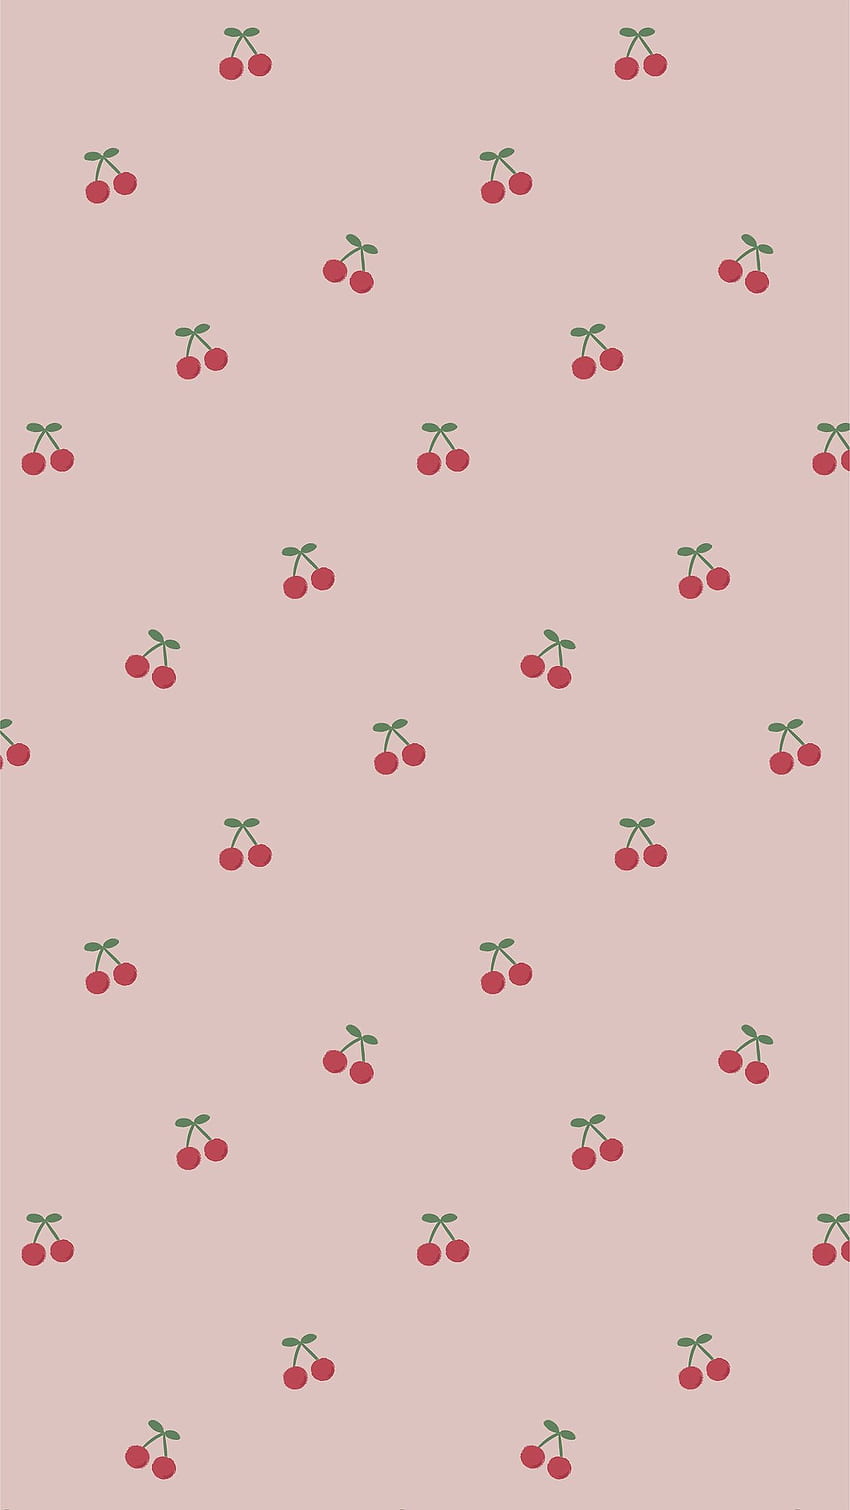 Cherry Photos Download The BEST Free Cherry Stock Photos  HD Images